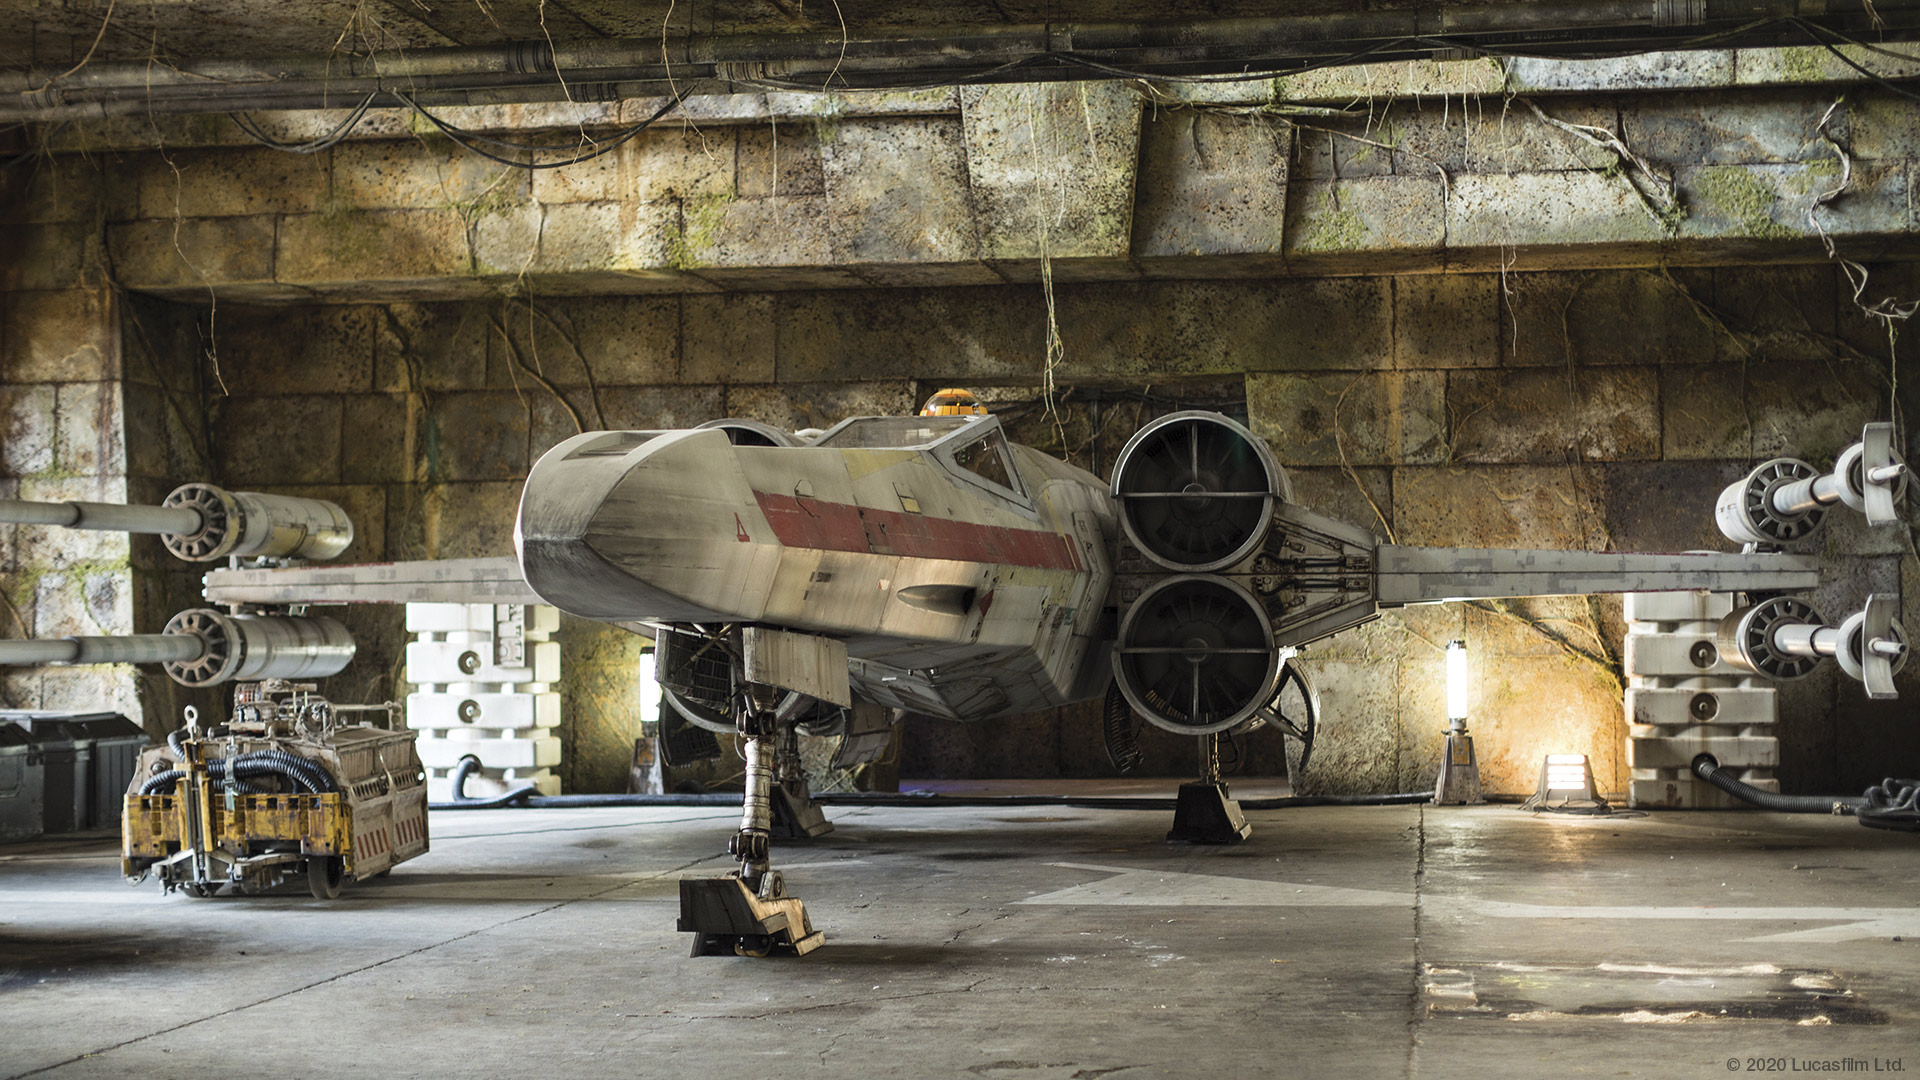 Star Wars Releases Official Background Images To Be Used On Video Calls